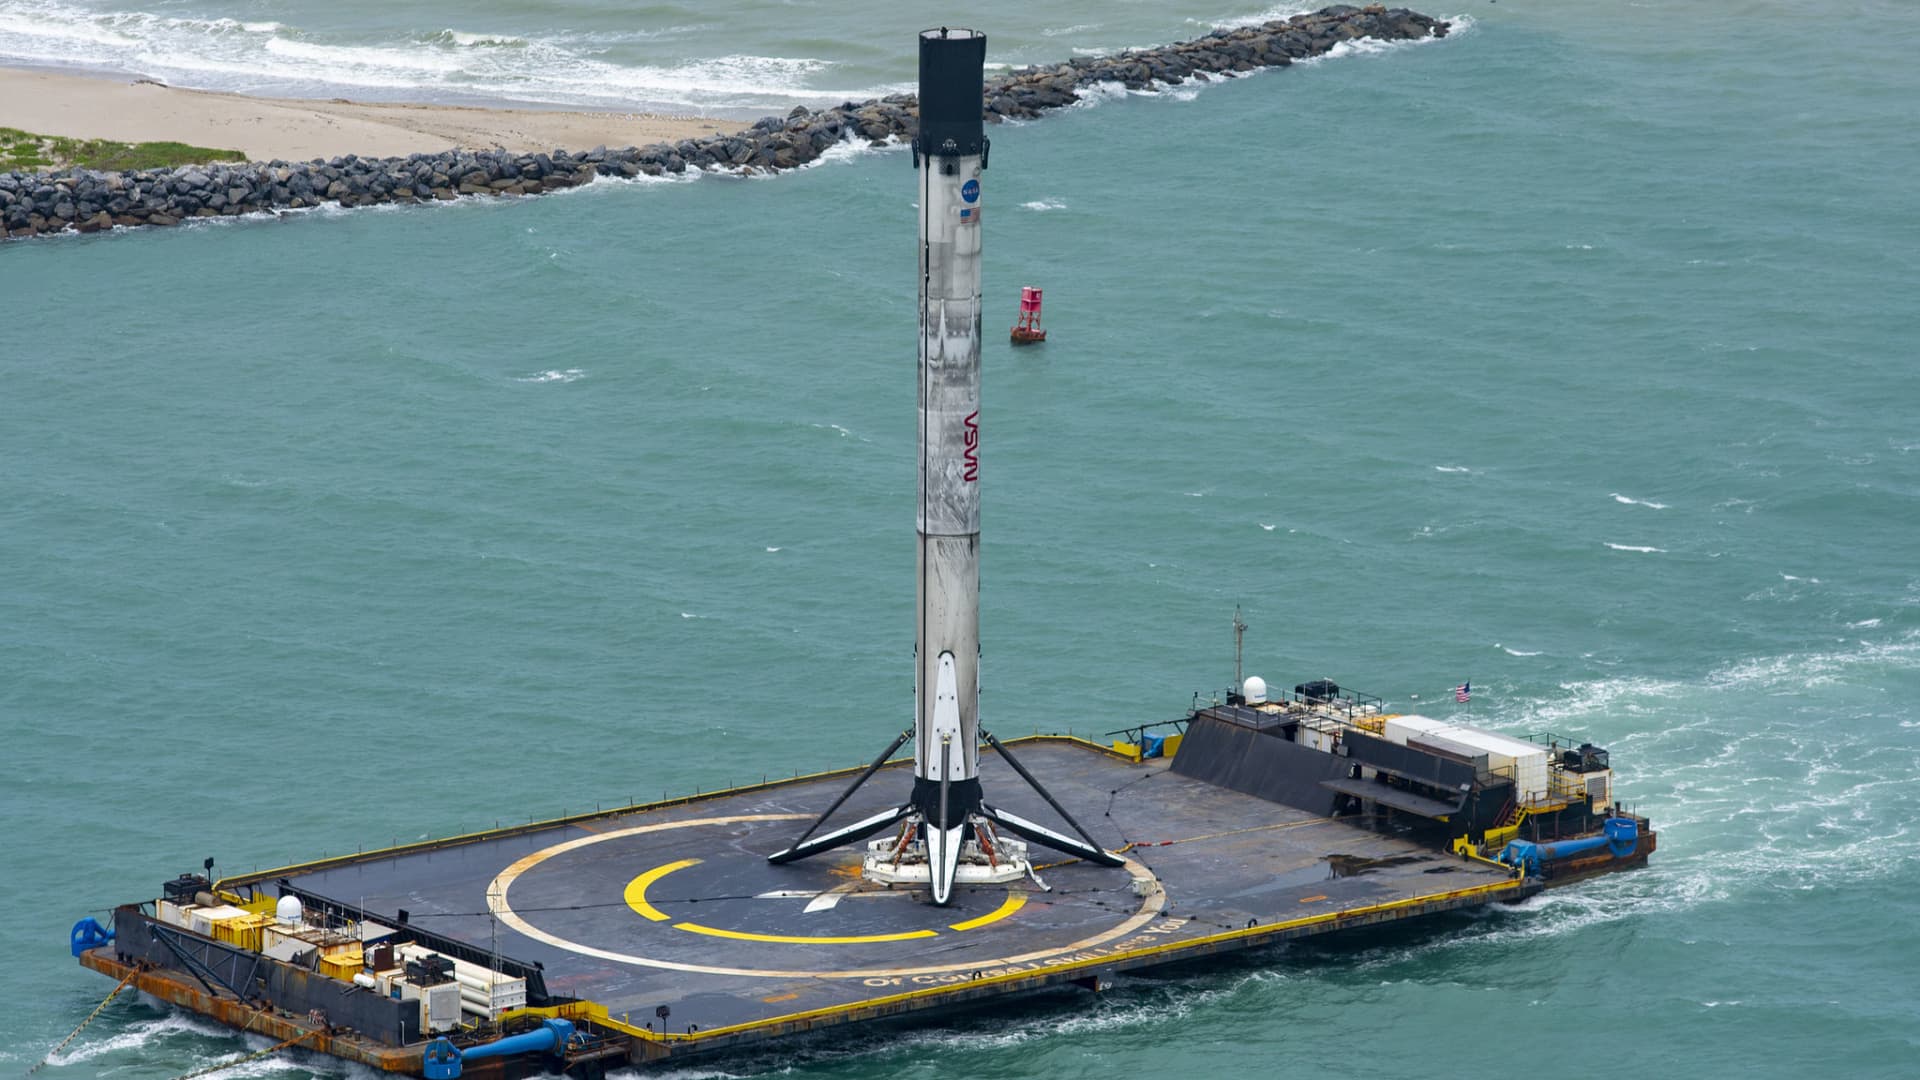 SpaceX wants to test its Starlink satellite internet network with boats it uses to land rockets